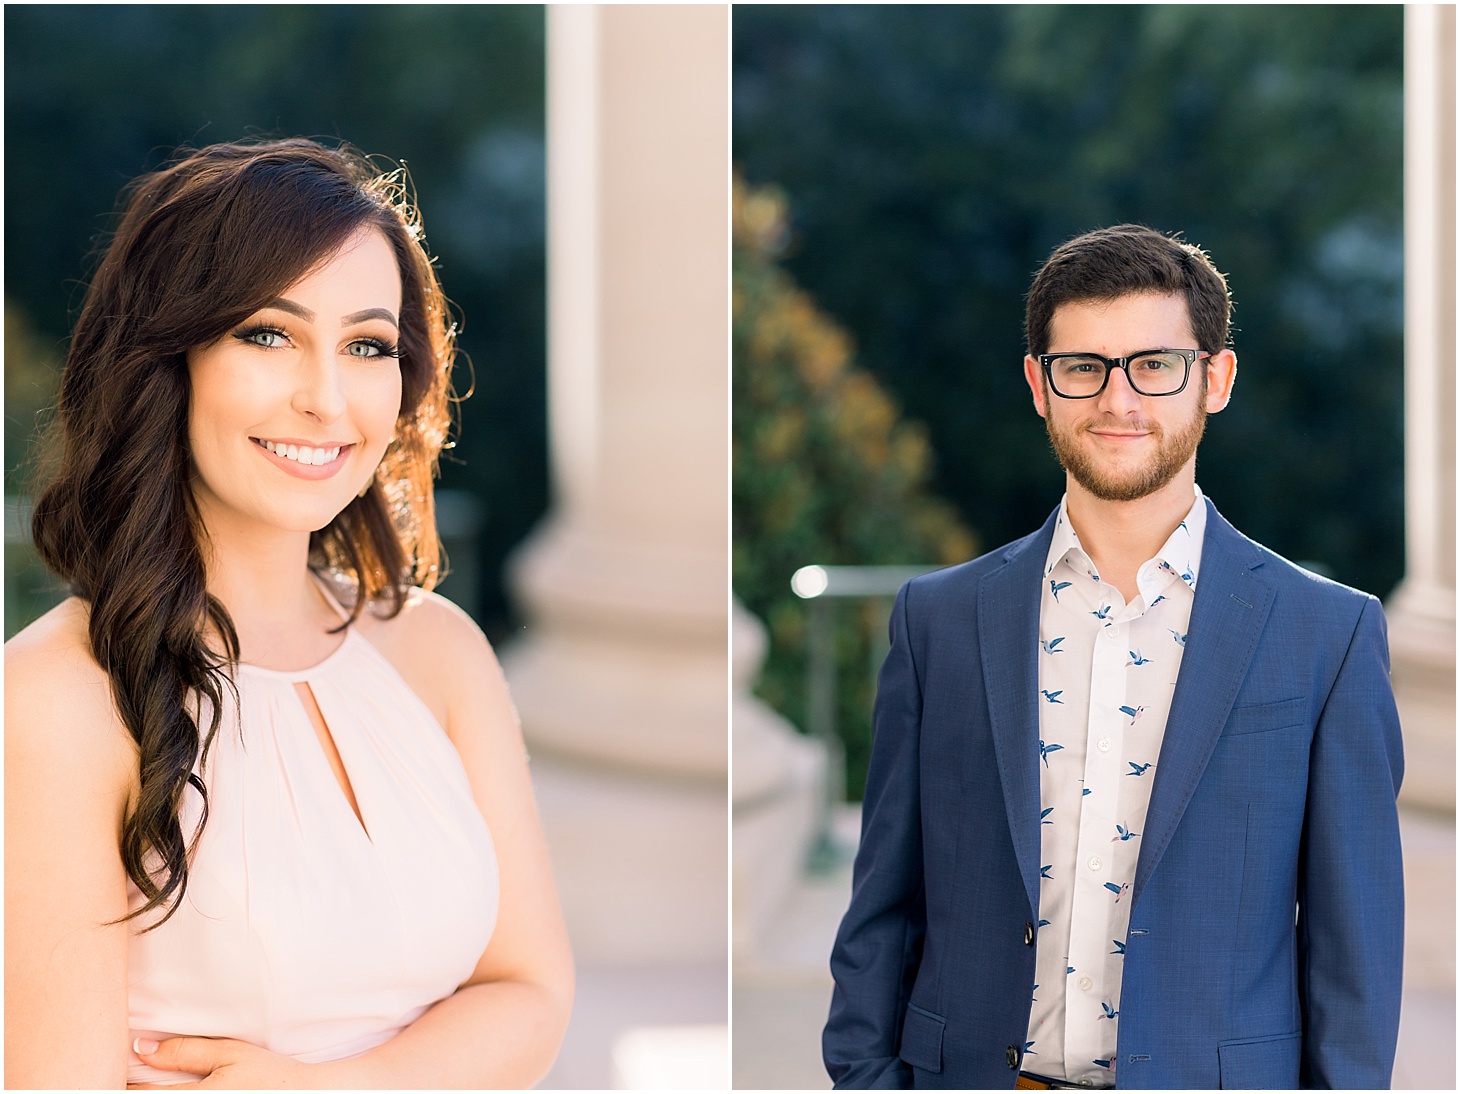 Engagement Portraits at the National Gallery of Art | Romantic Sunrise Engagement Session at the Smithsonian Gardens | Sarah Bradshaw Photography